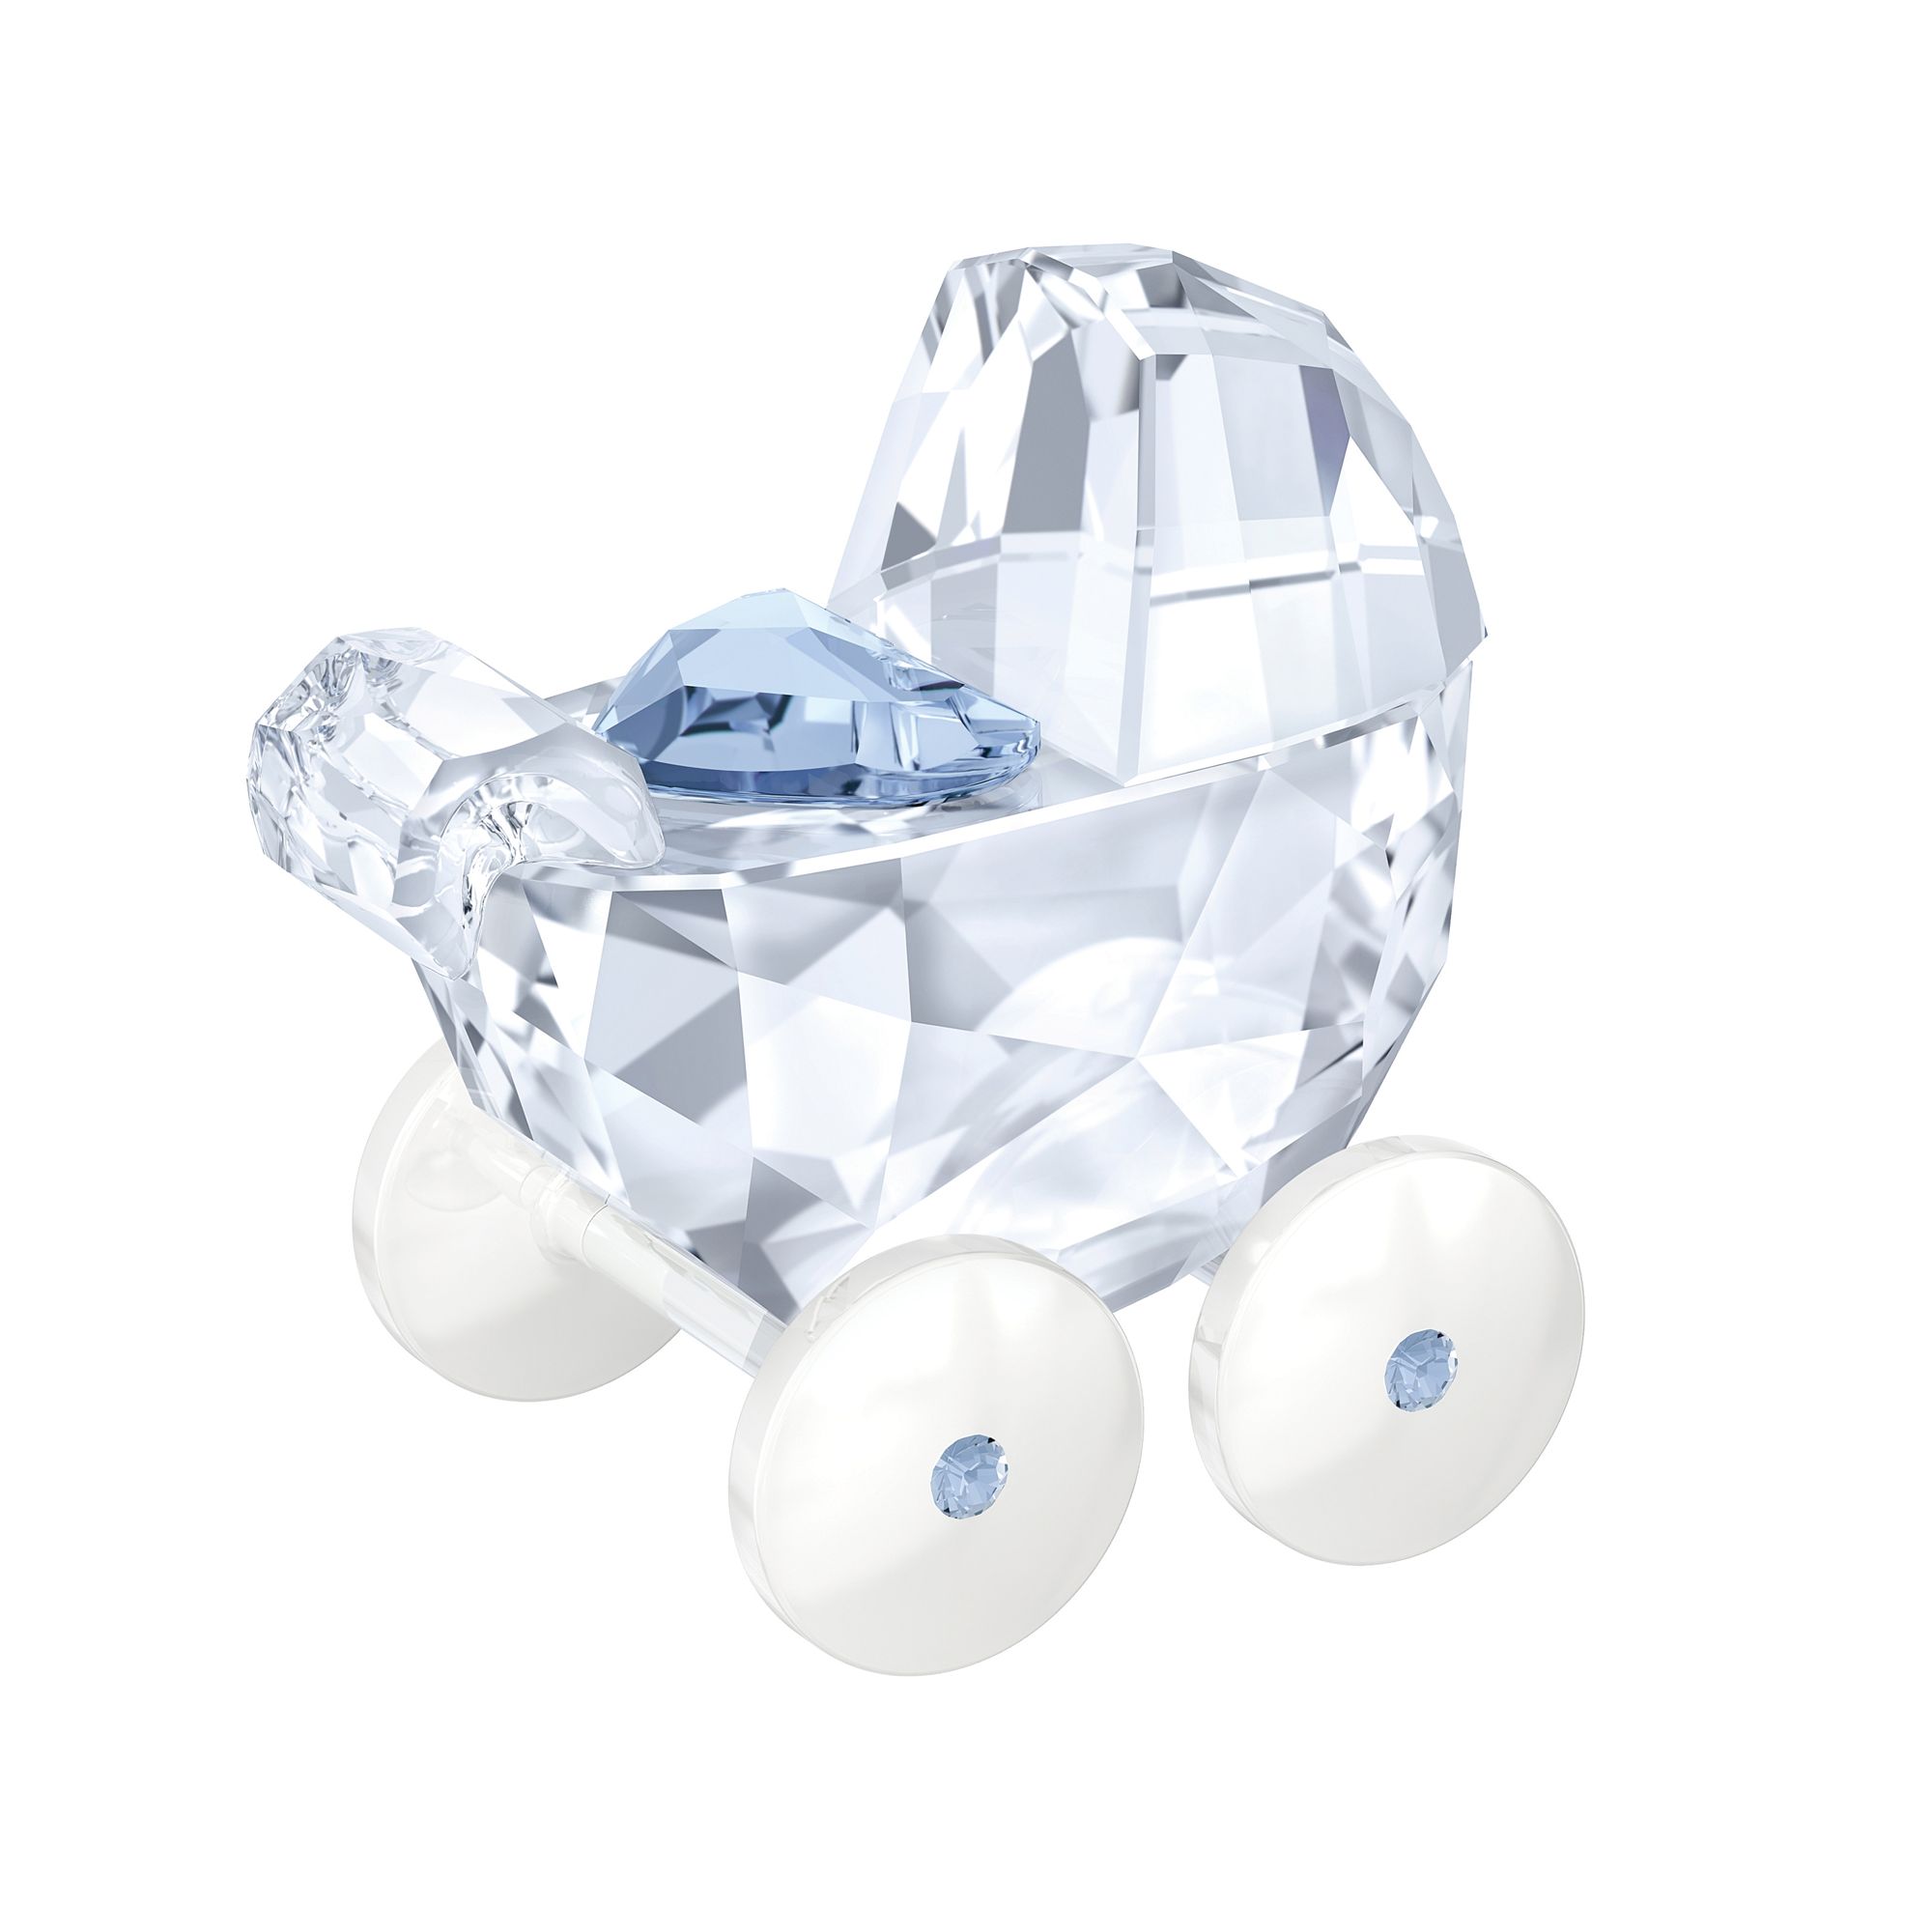 Swarovski Crystal "Baby Carriage" Light Blue and Clear Crystal Figurine |  Ross-Simons